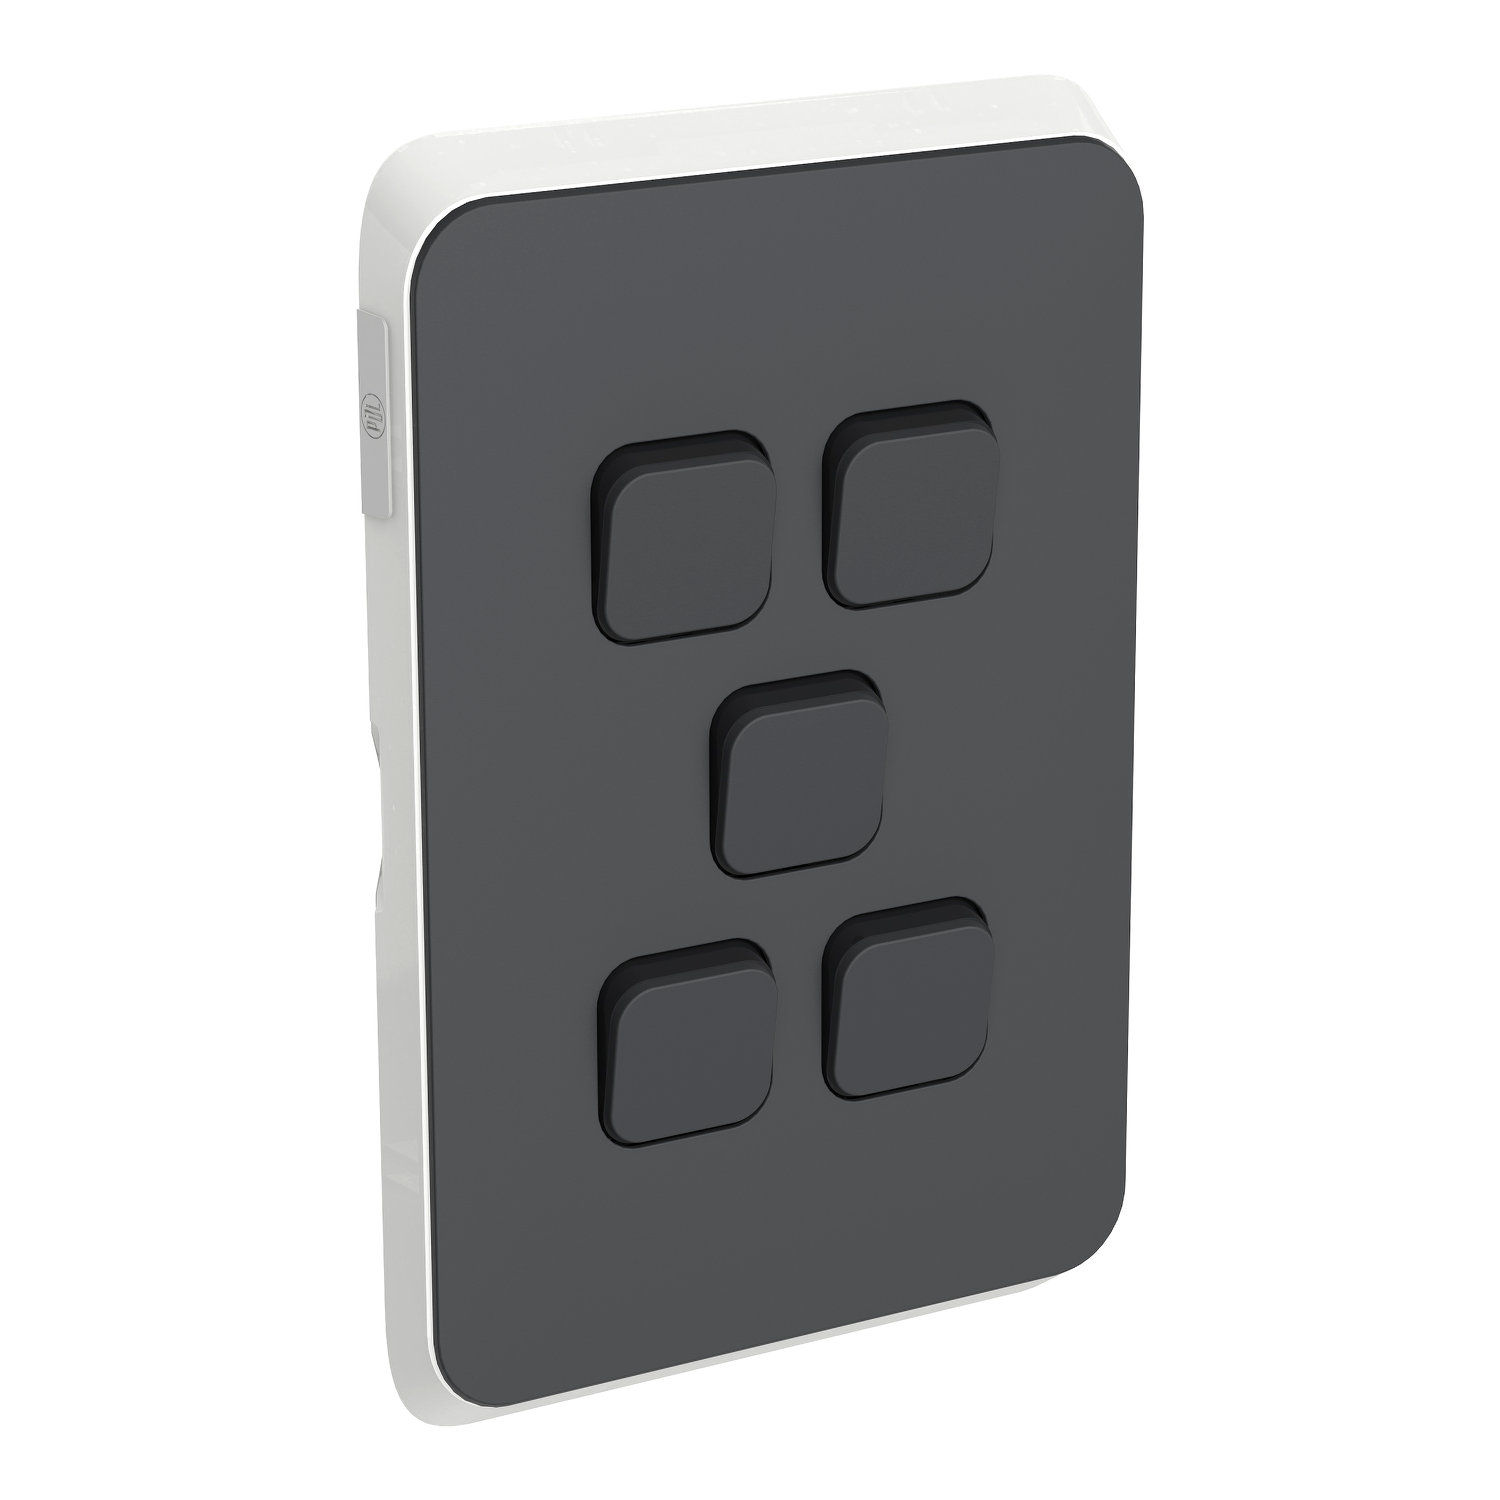 PDL Iconic - Cover Plate Switch 5-Gang - Anthracite